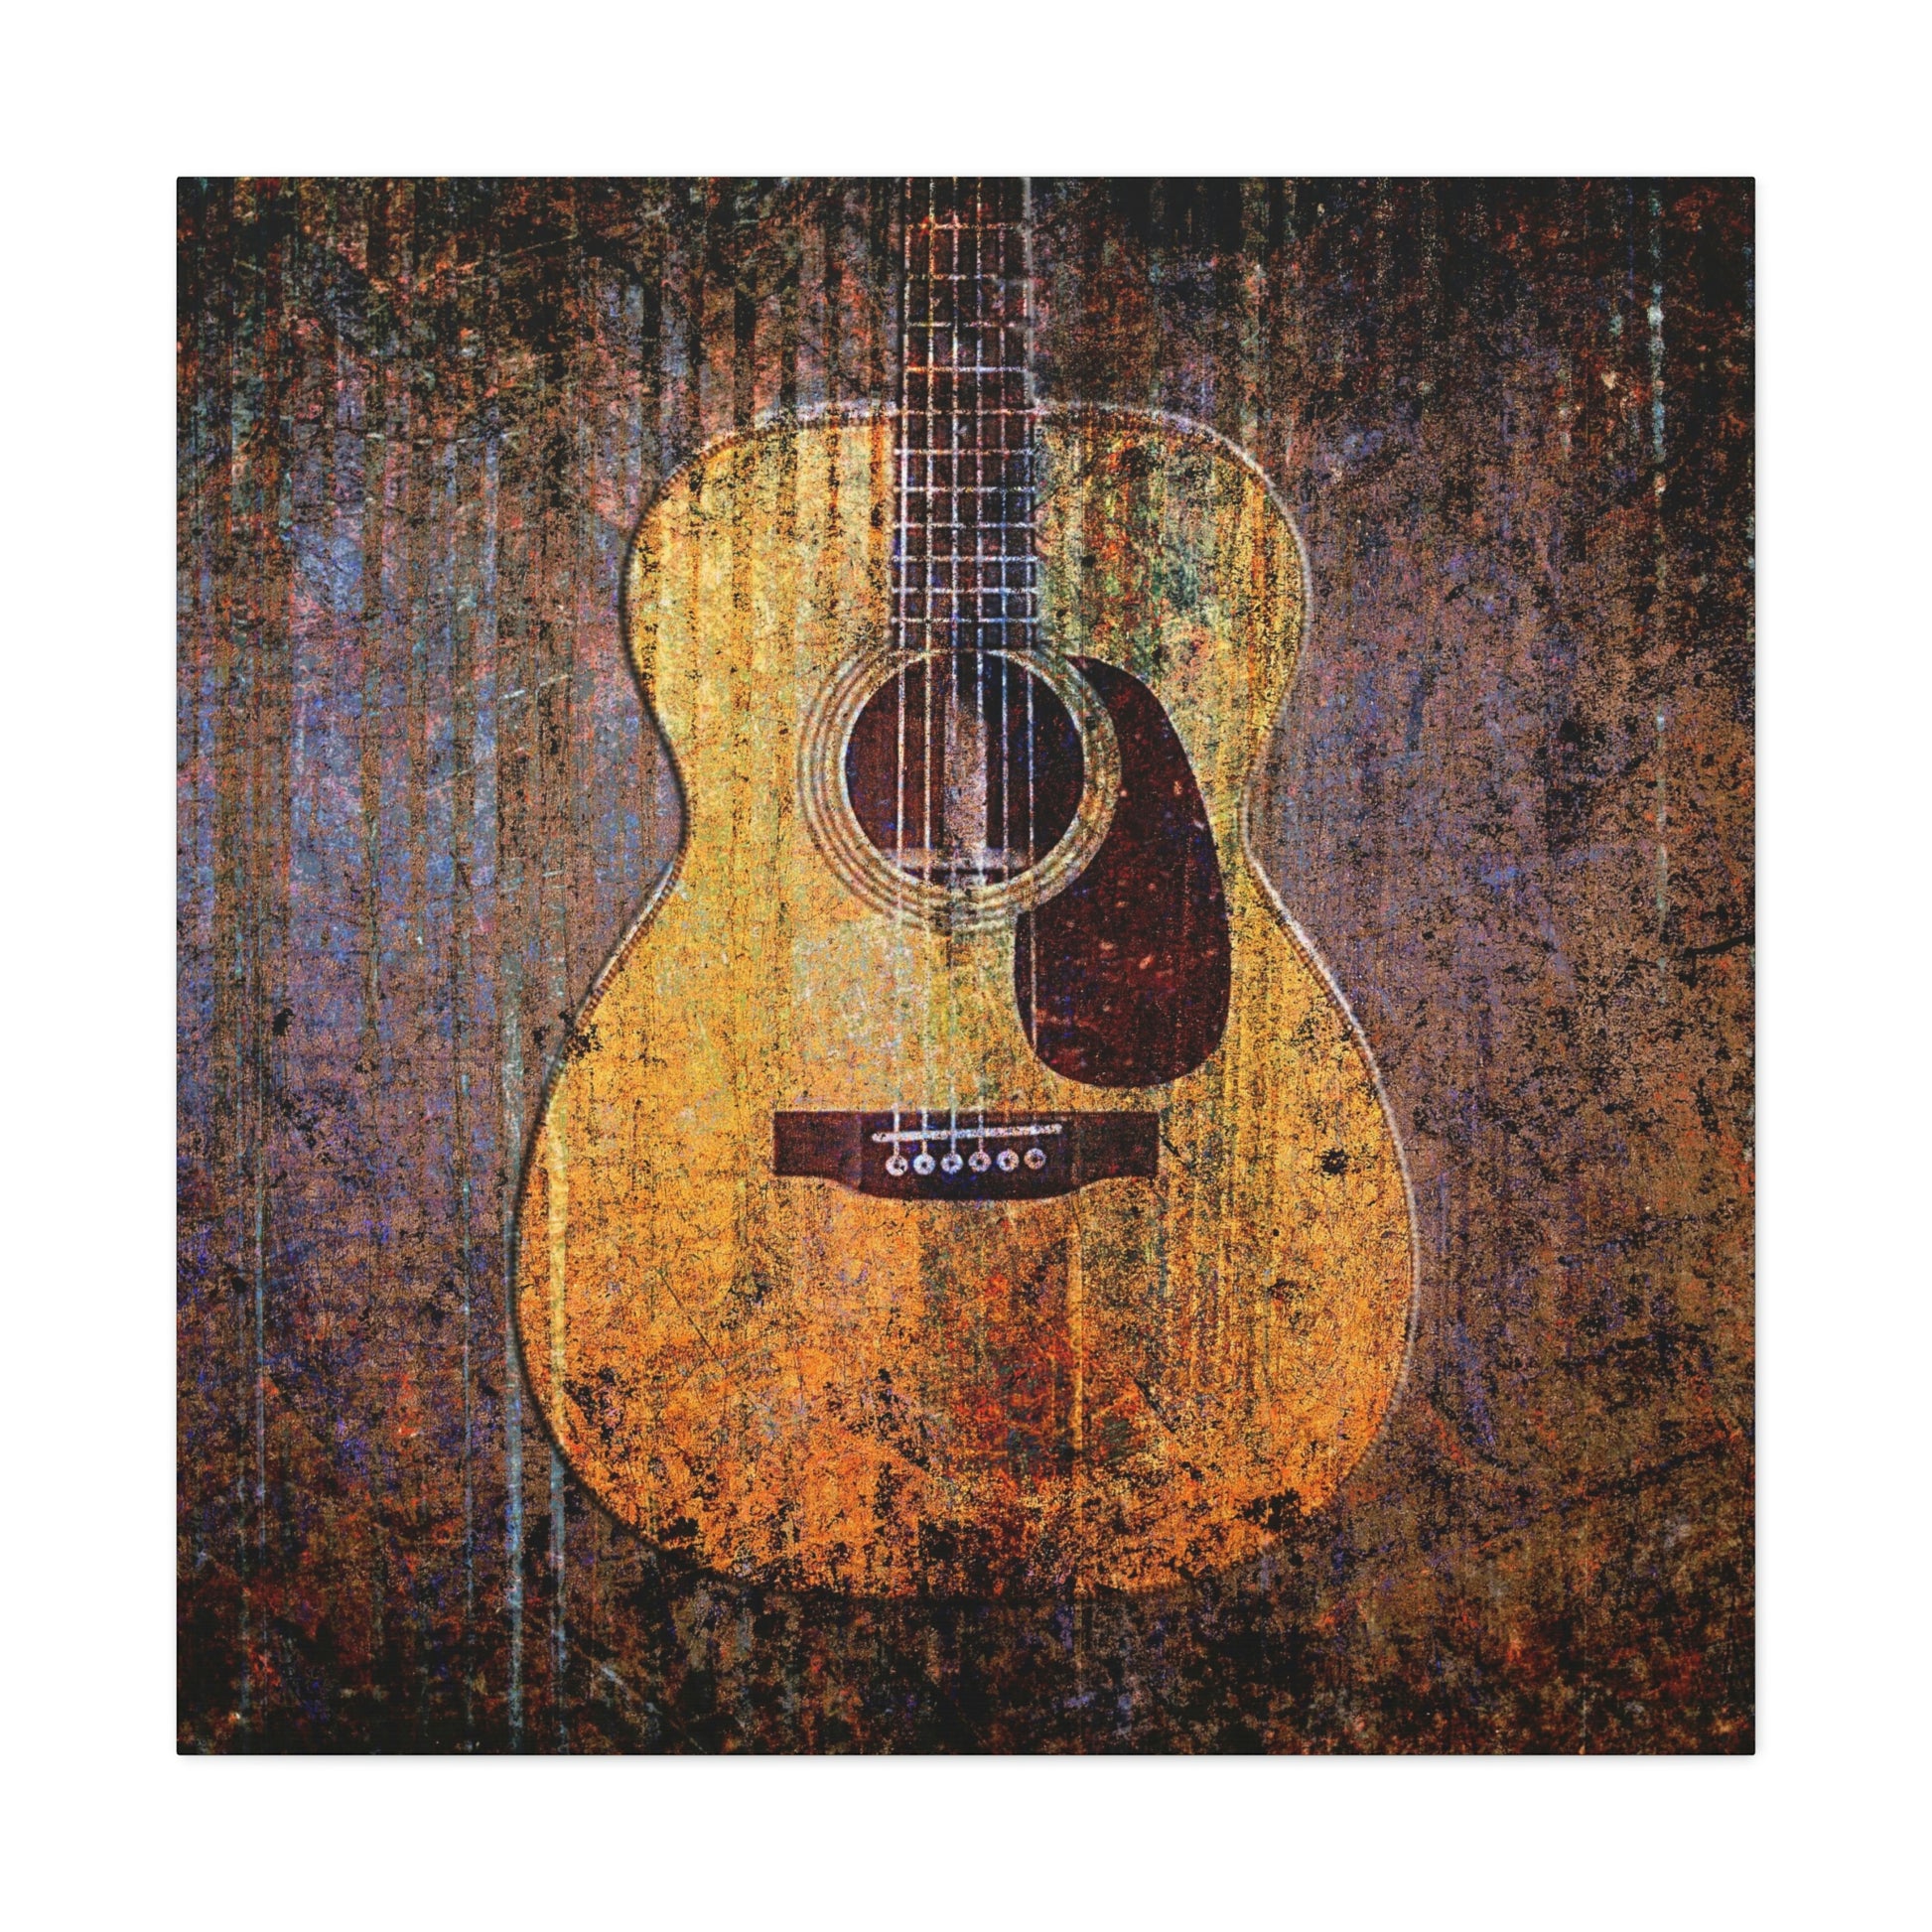 Gift for Guitarists and Musicians Acoustic Guitar Print on Unframed Stretched Canvas 5 sizes available